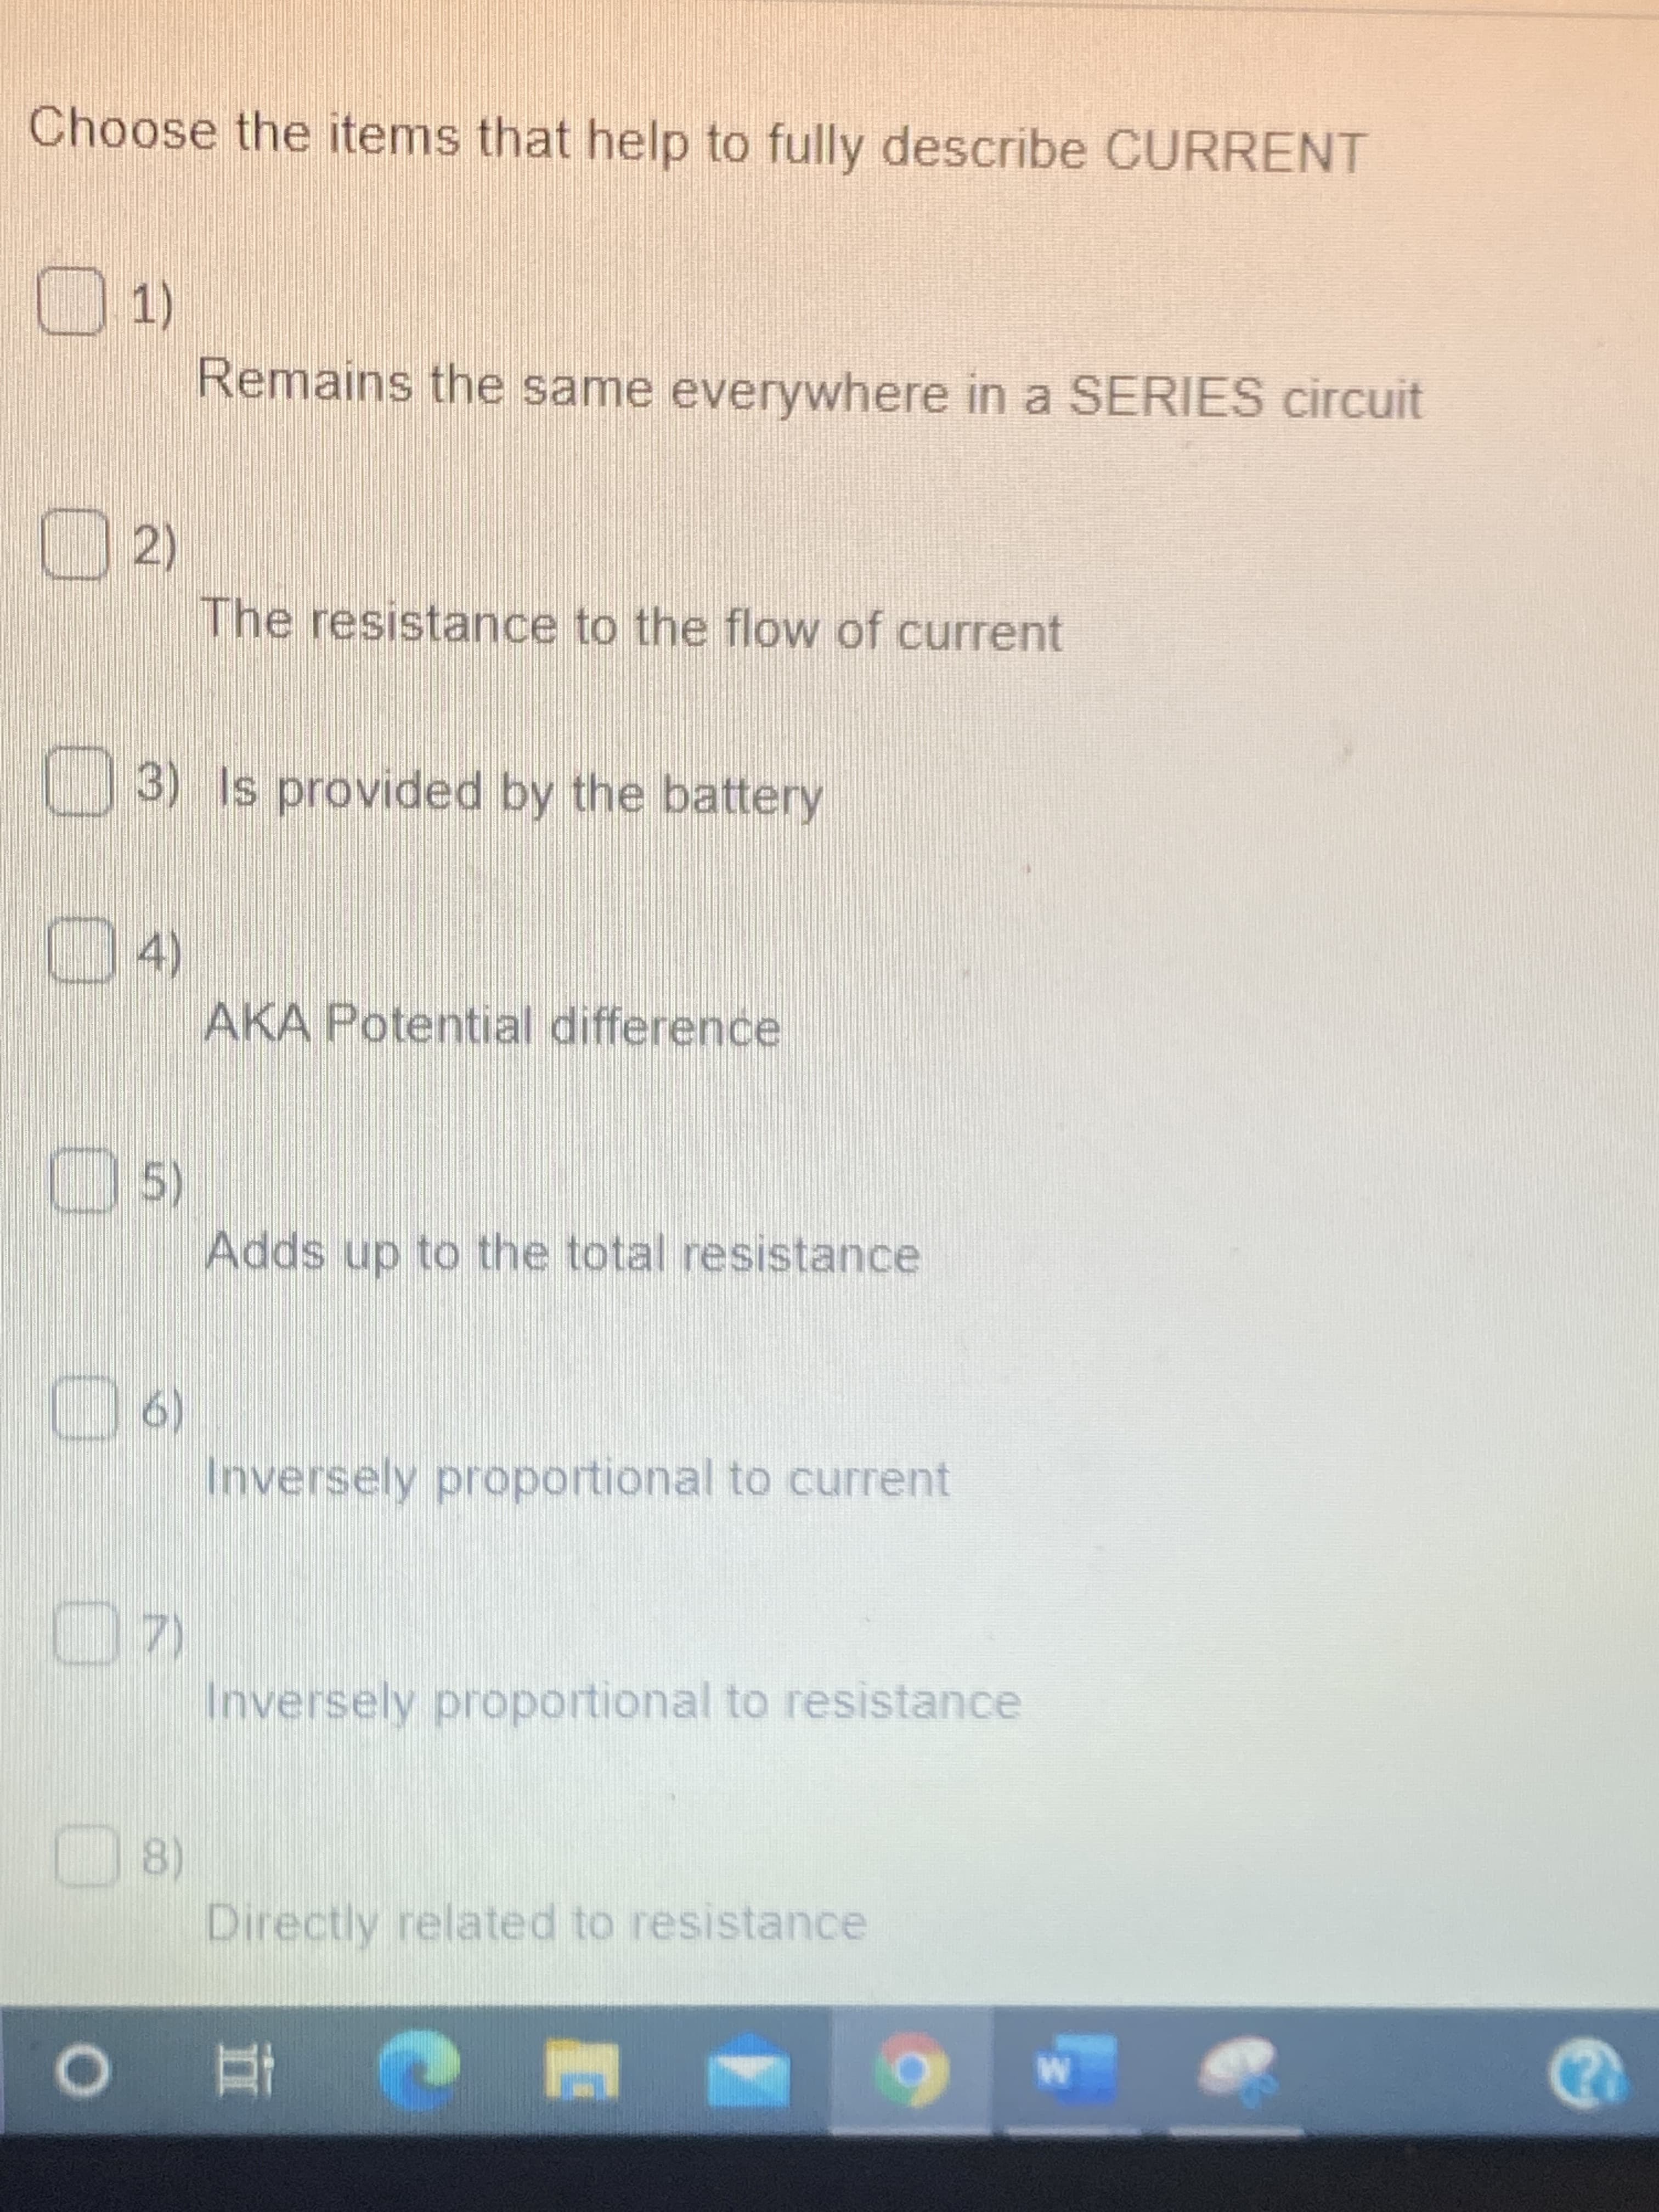 Choose the items that help to fully describe CURRENT
1)
Remains the same everywhere in a SERIES circuit
2)
The resistance to the flow of current
U3) Is provided by the battery
(ヤ
AKA Potential difference
4)
5)
Adds up to the total resistance
(9()
Inversely proportional to current
7)
Inversely proportional to resistance
8)
Directly related to resistance
C直0
